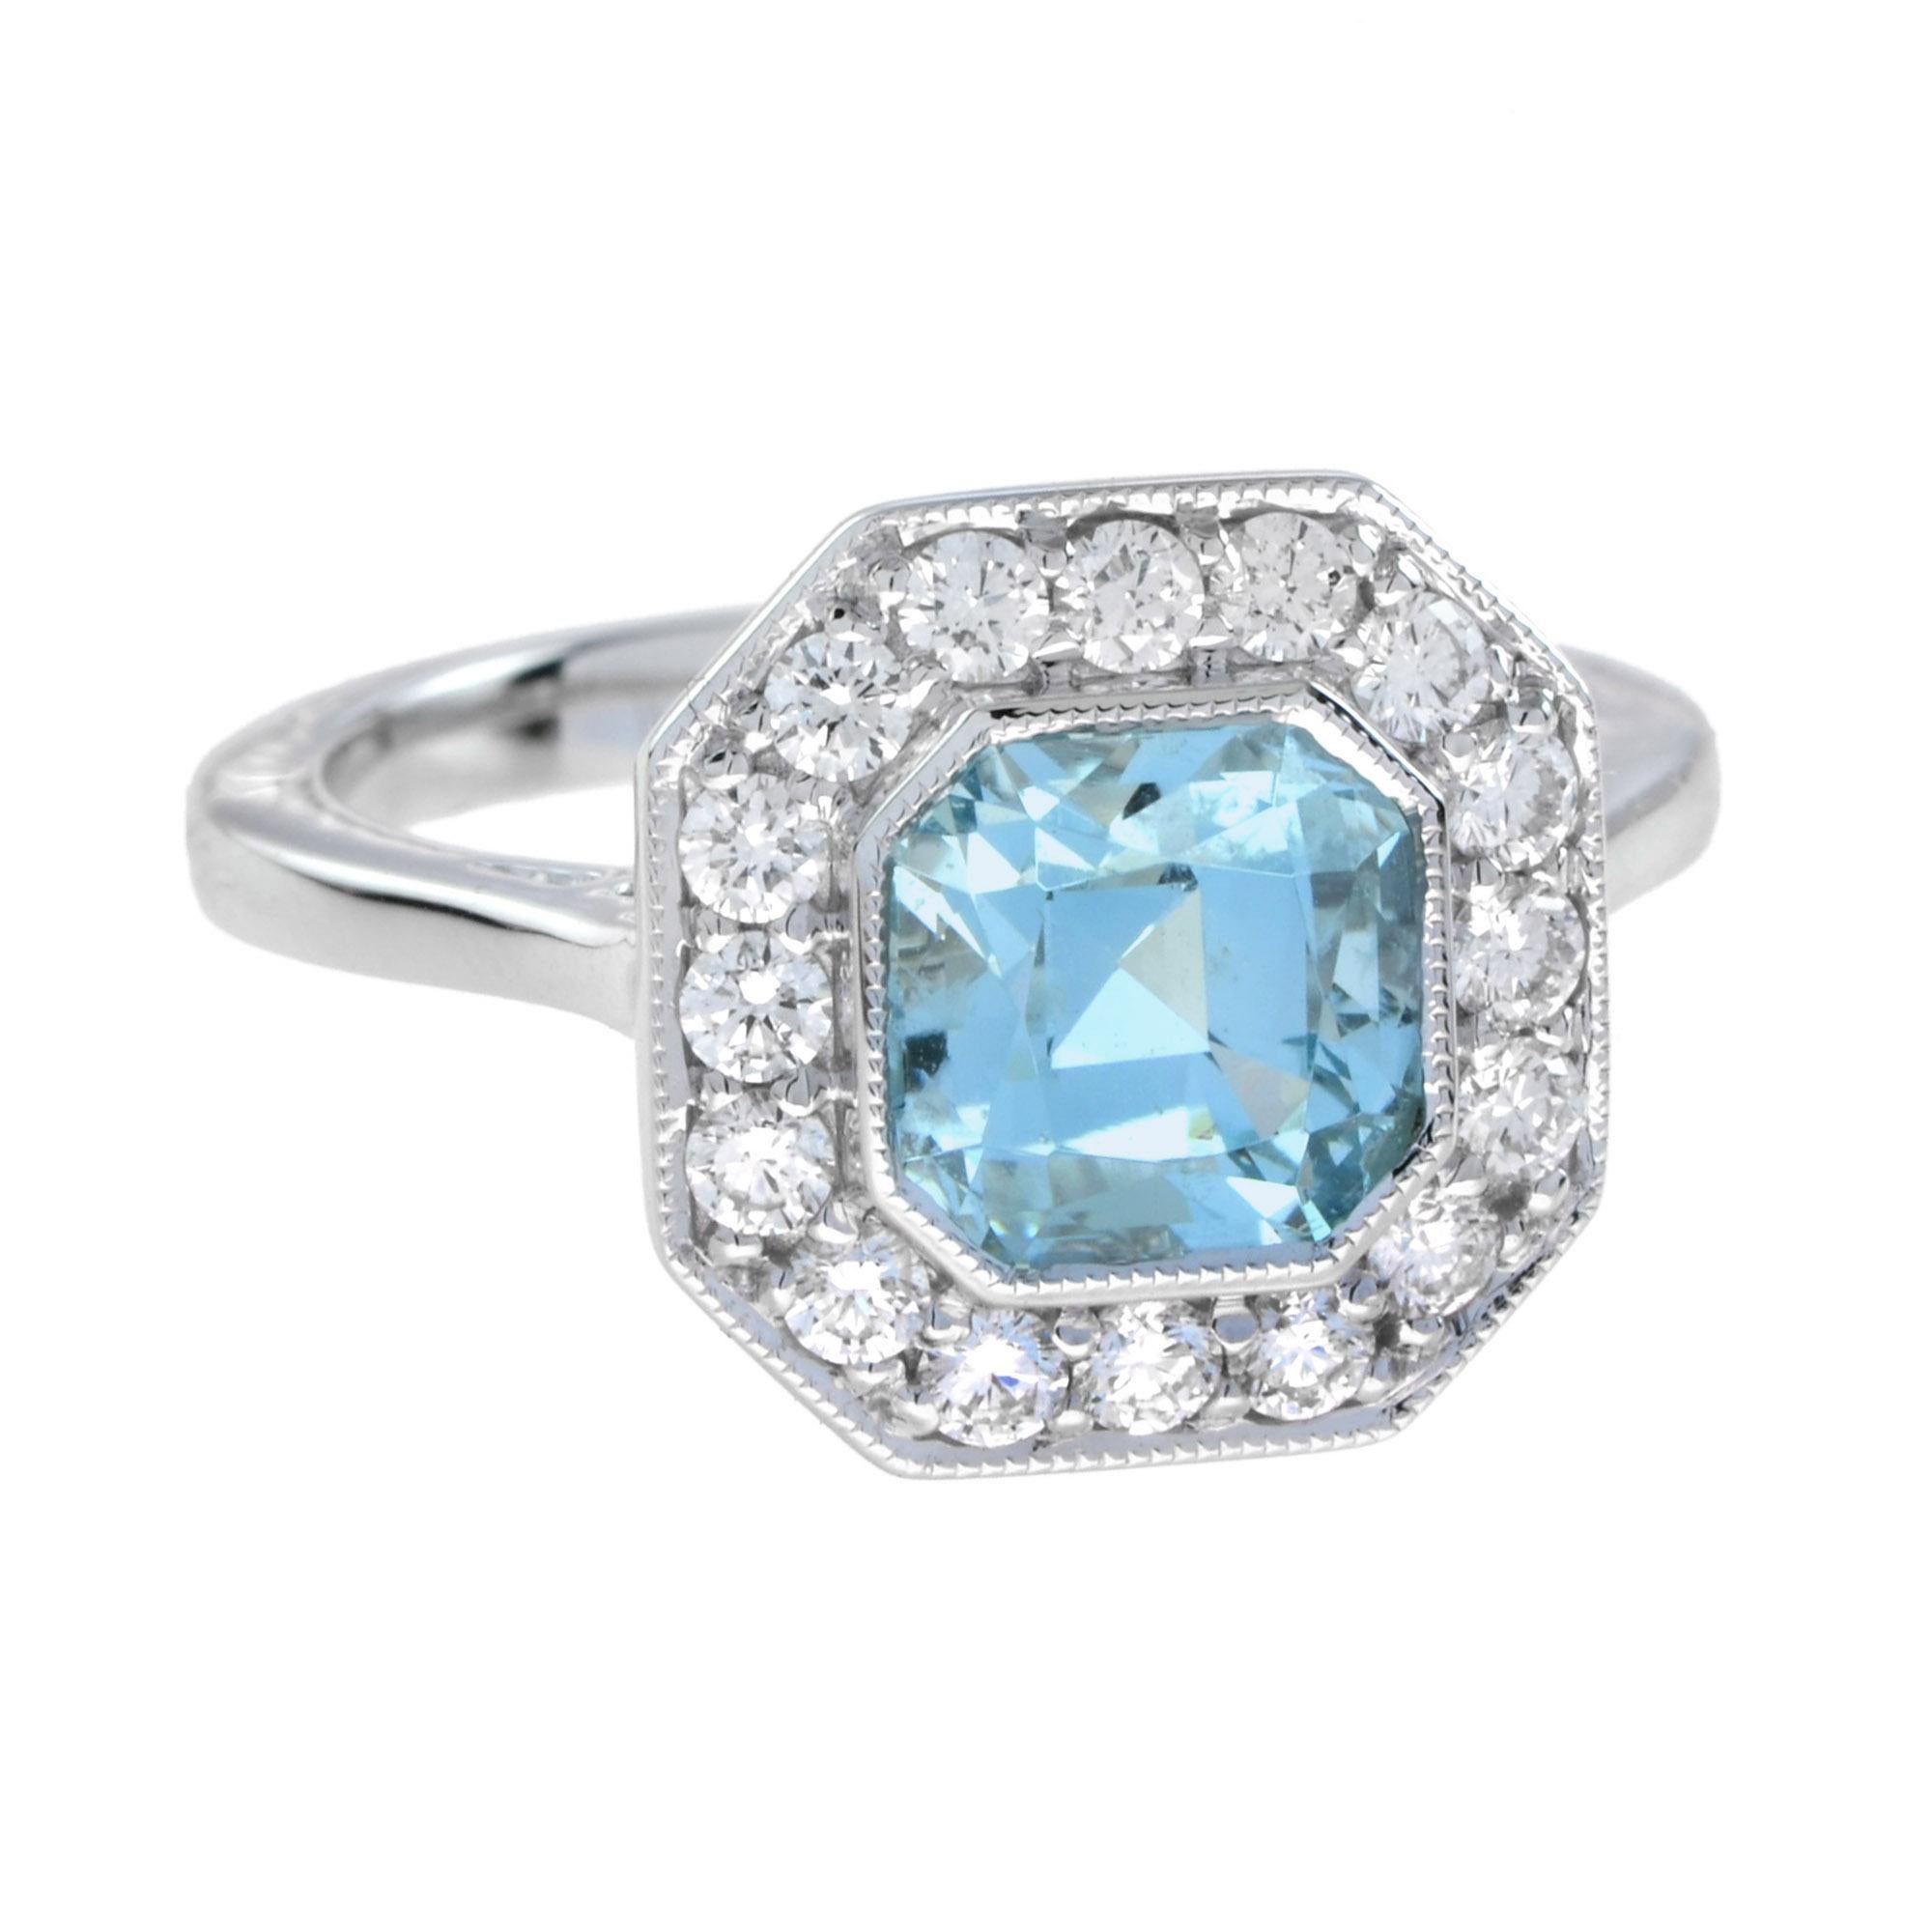 For Sale:  2.7 Ct. Blue Topaz and Diamond Art Deco Style Halo Engagement Ring in 14K Gold 3